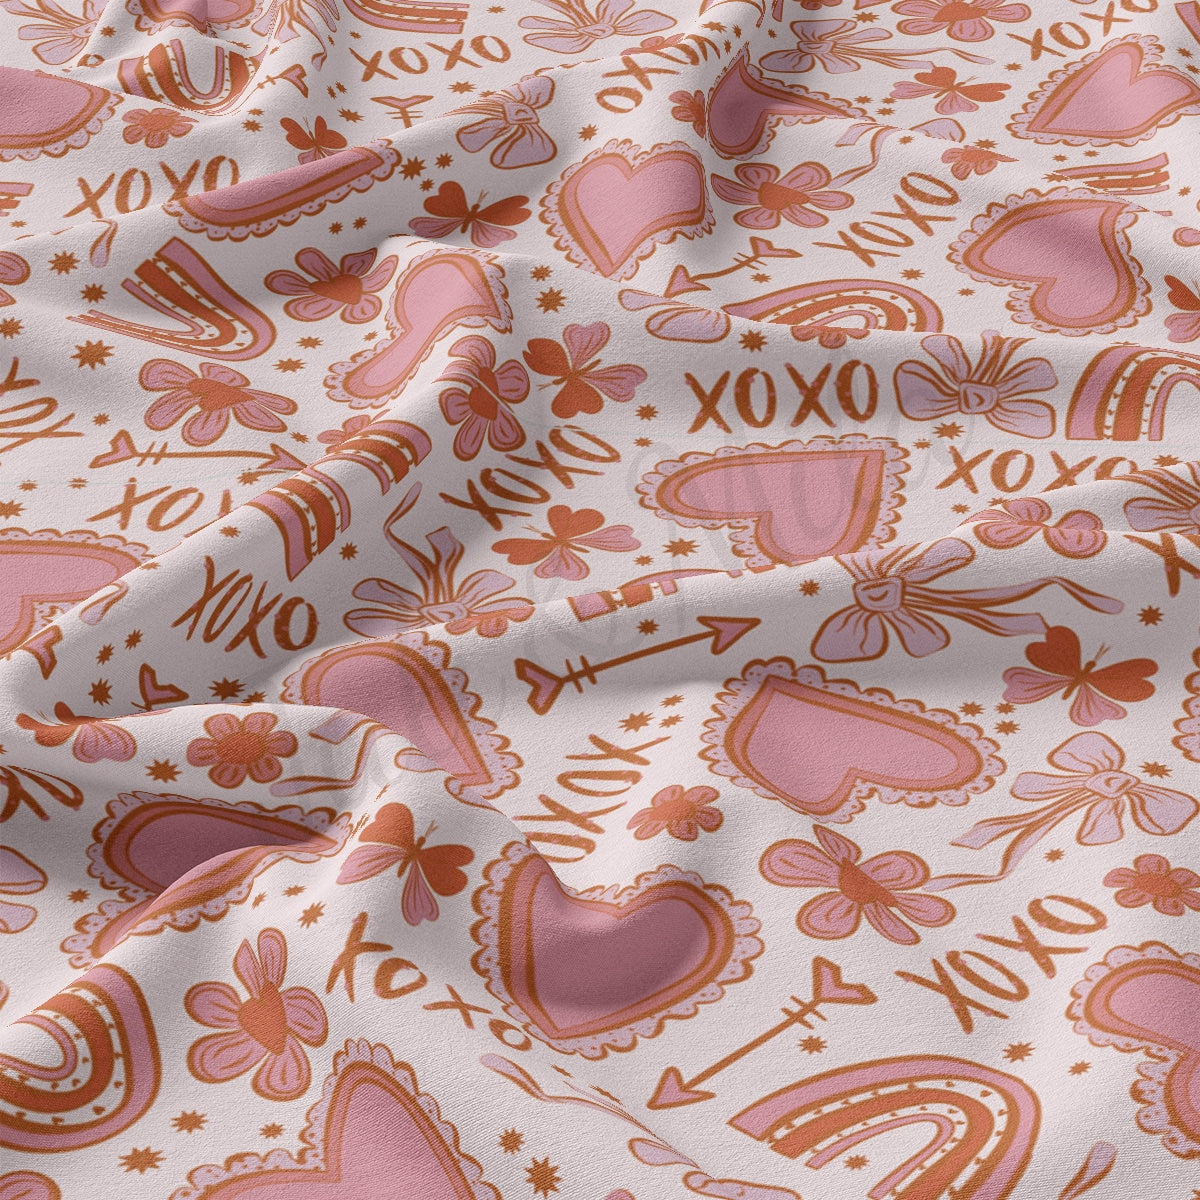 DBP Fabric Double Brushed Polyester DBP2218 Valentine's Day